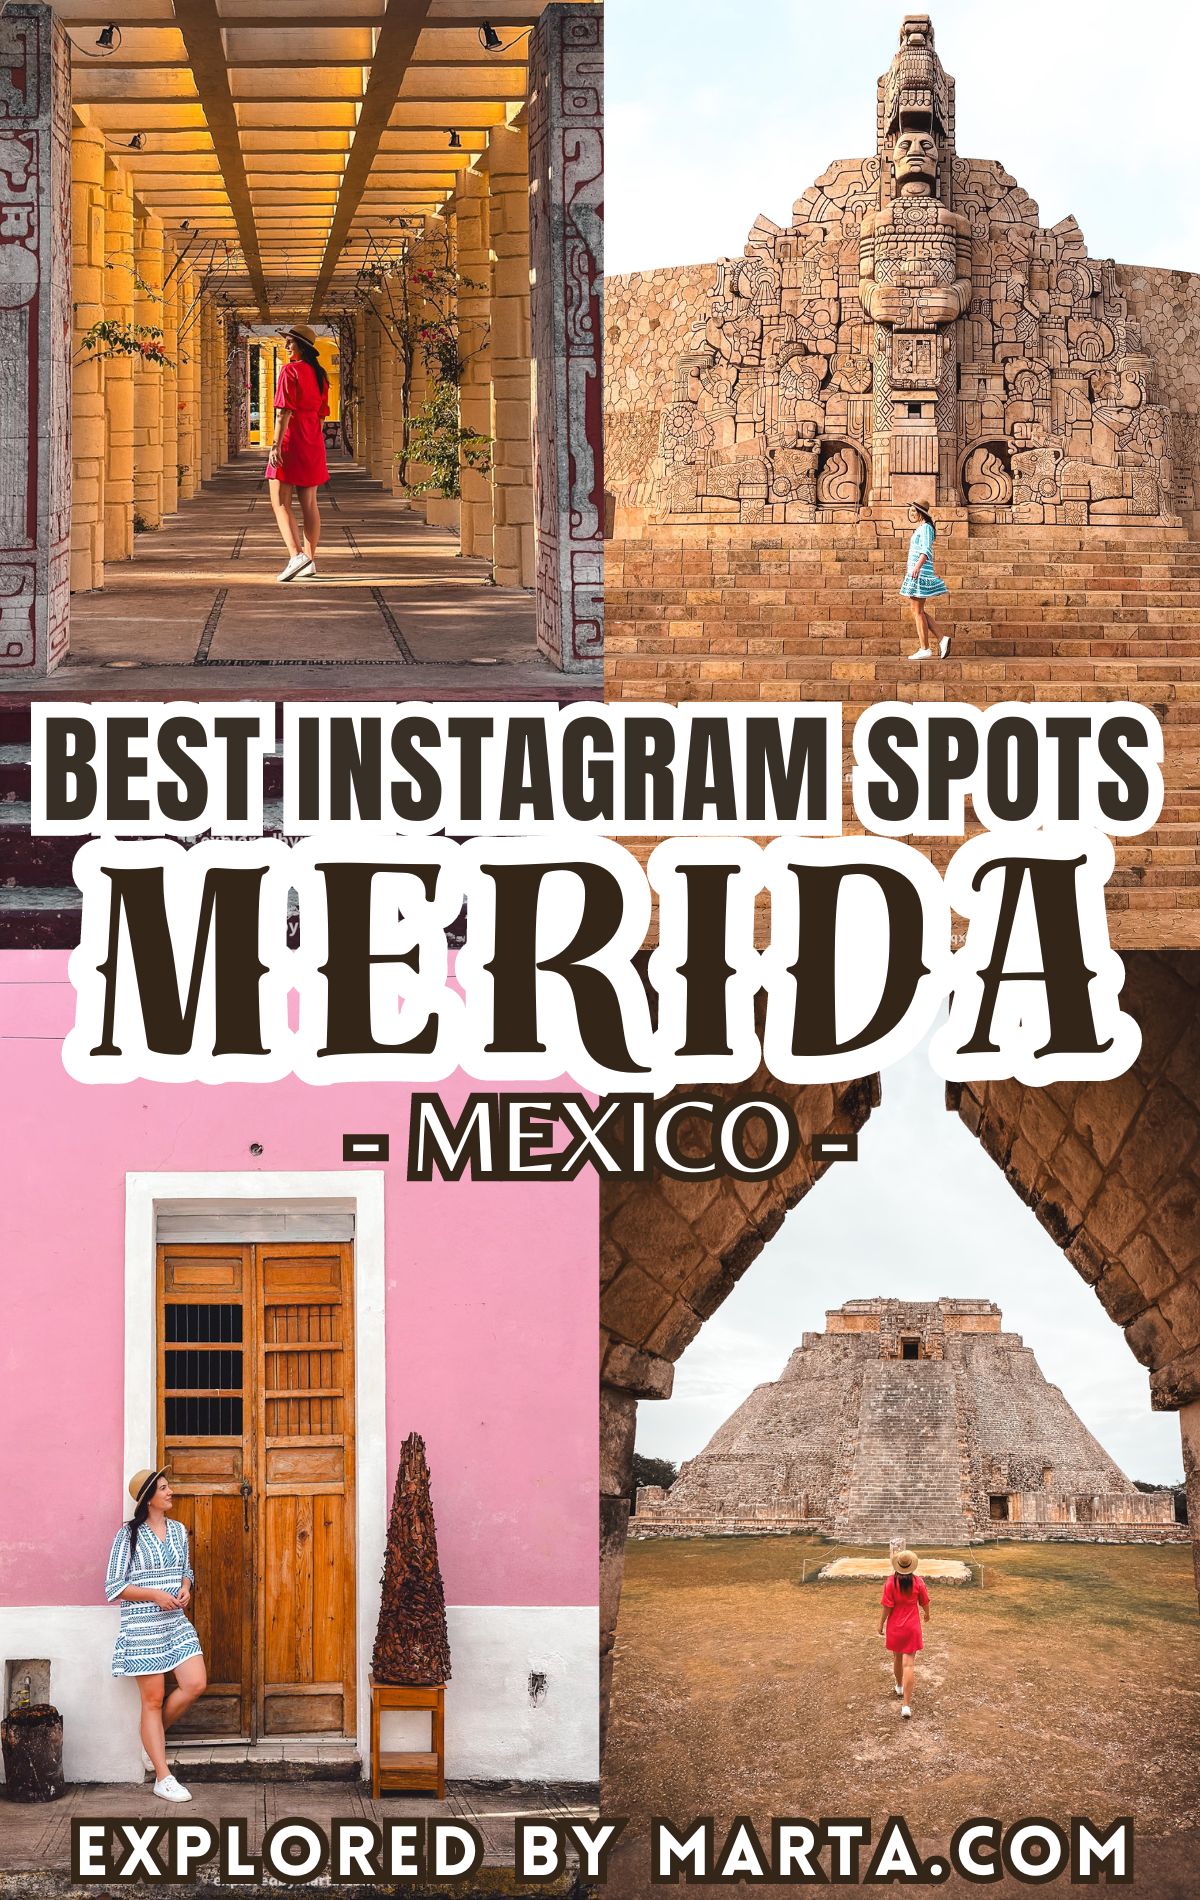 Most iconic Instagram spots in Merida, Mexico - photos for Pinterest